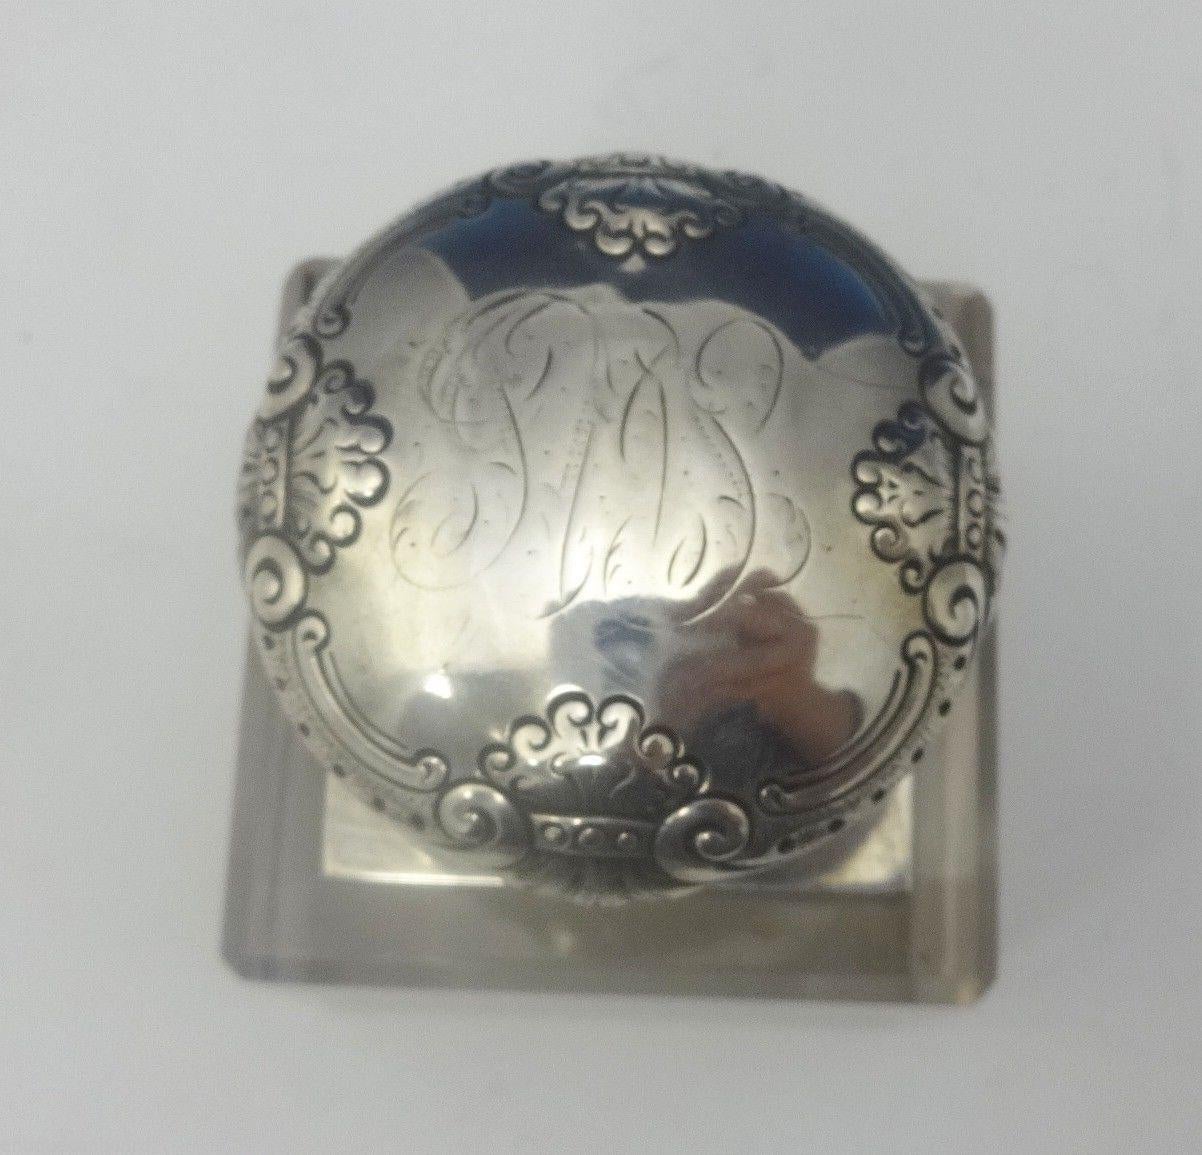 Ferdinand Fuchs & Bros.
This fabulous inkwell was made by Ferd Fuchs & Bros. of New York, circa 1884-1891. The piece is made of crystal with a sterling silver top and it's marked with #446. It has a vintage light monogram (see photo). The